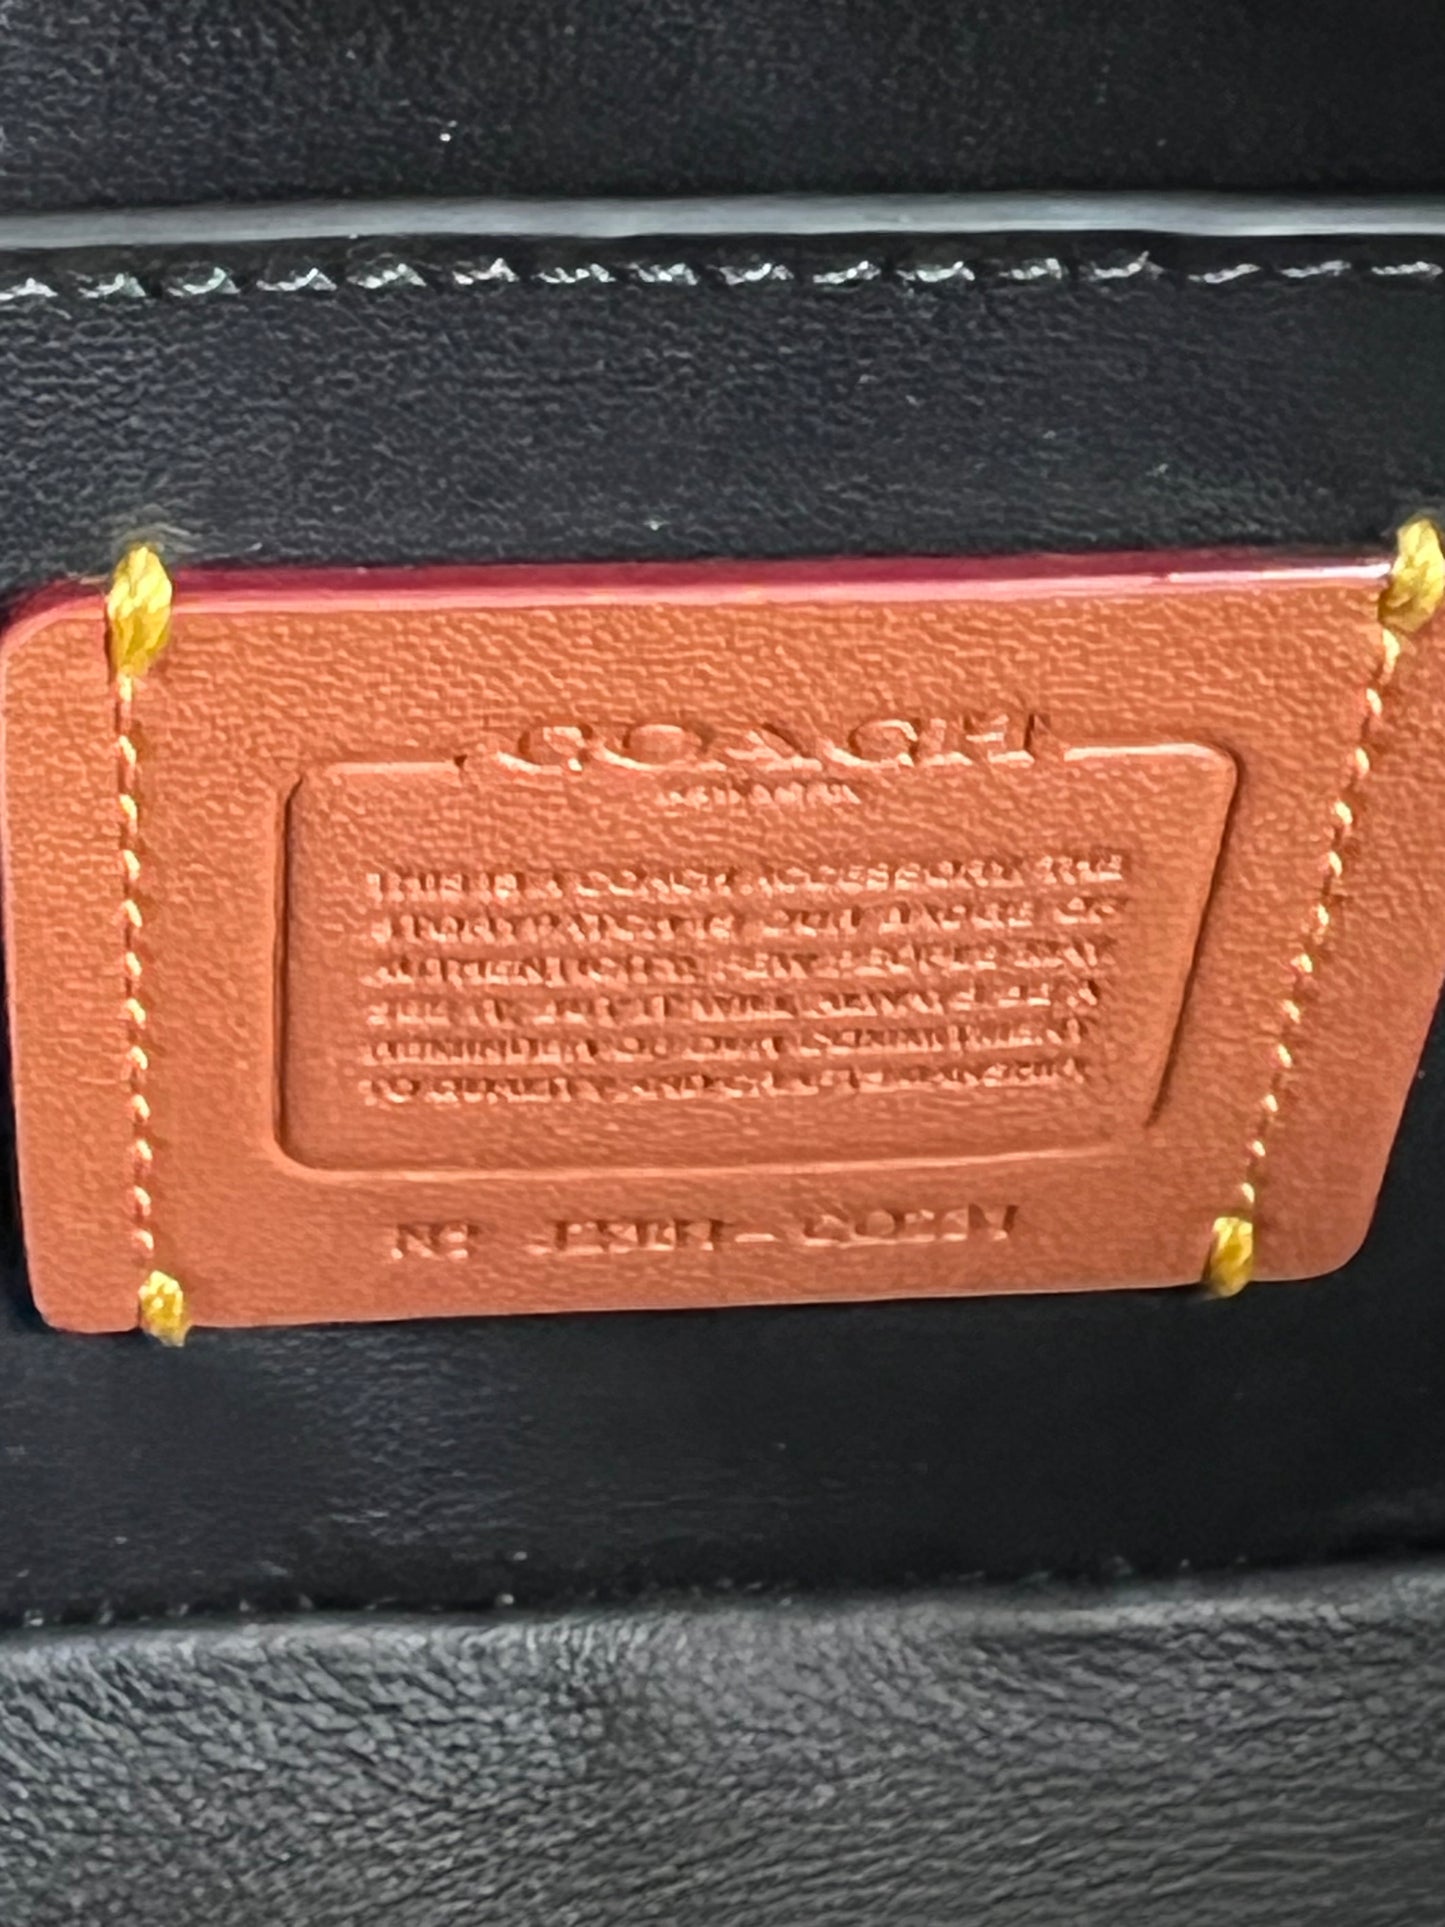 Coach Avery Shoulder Bag in Patchwork